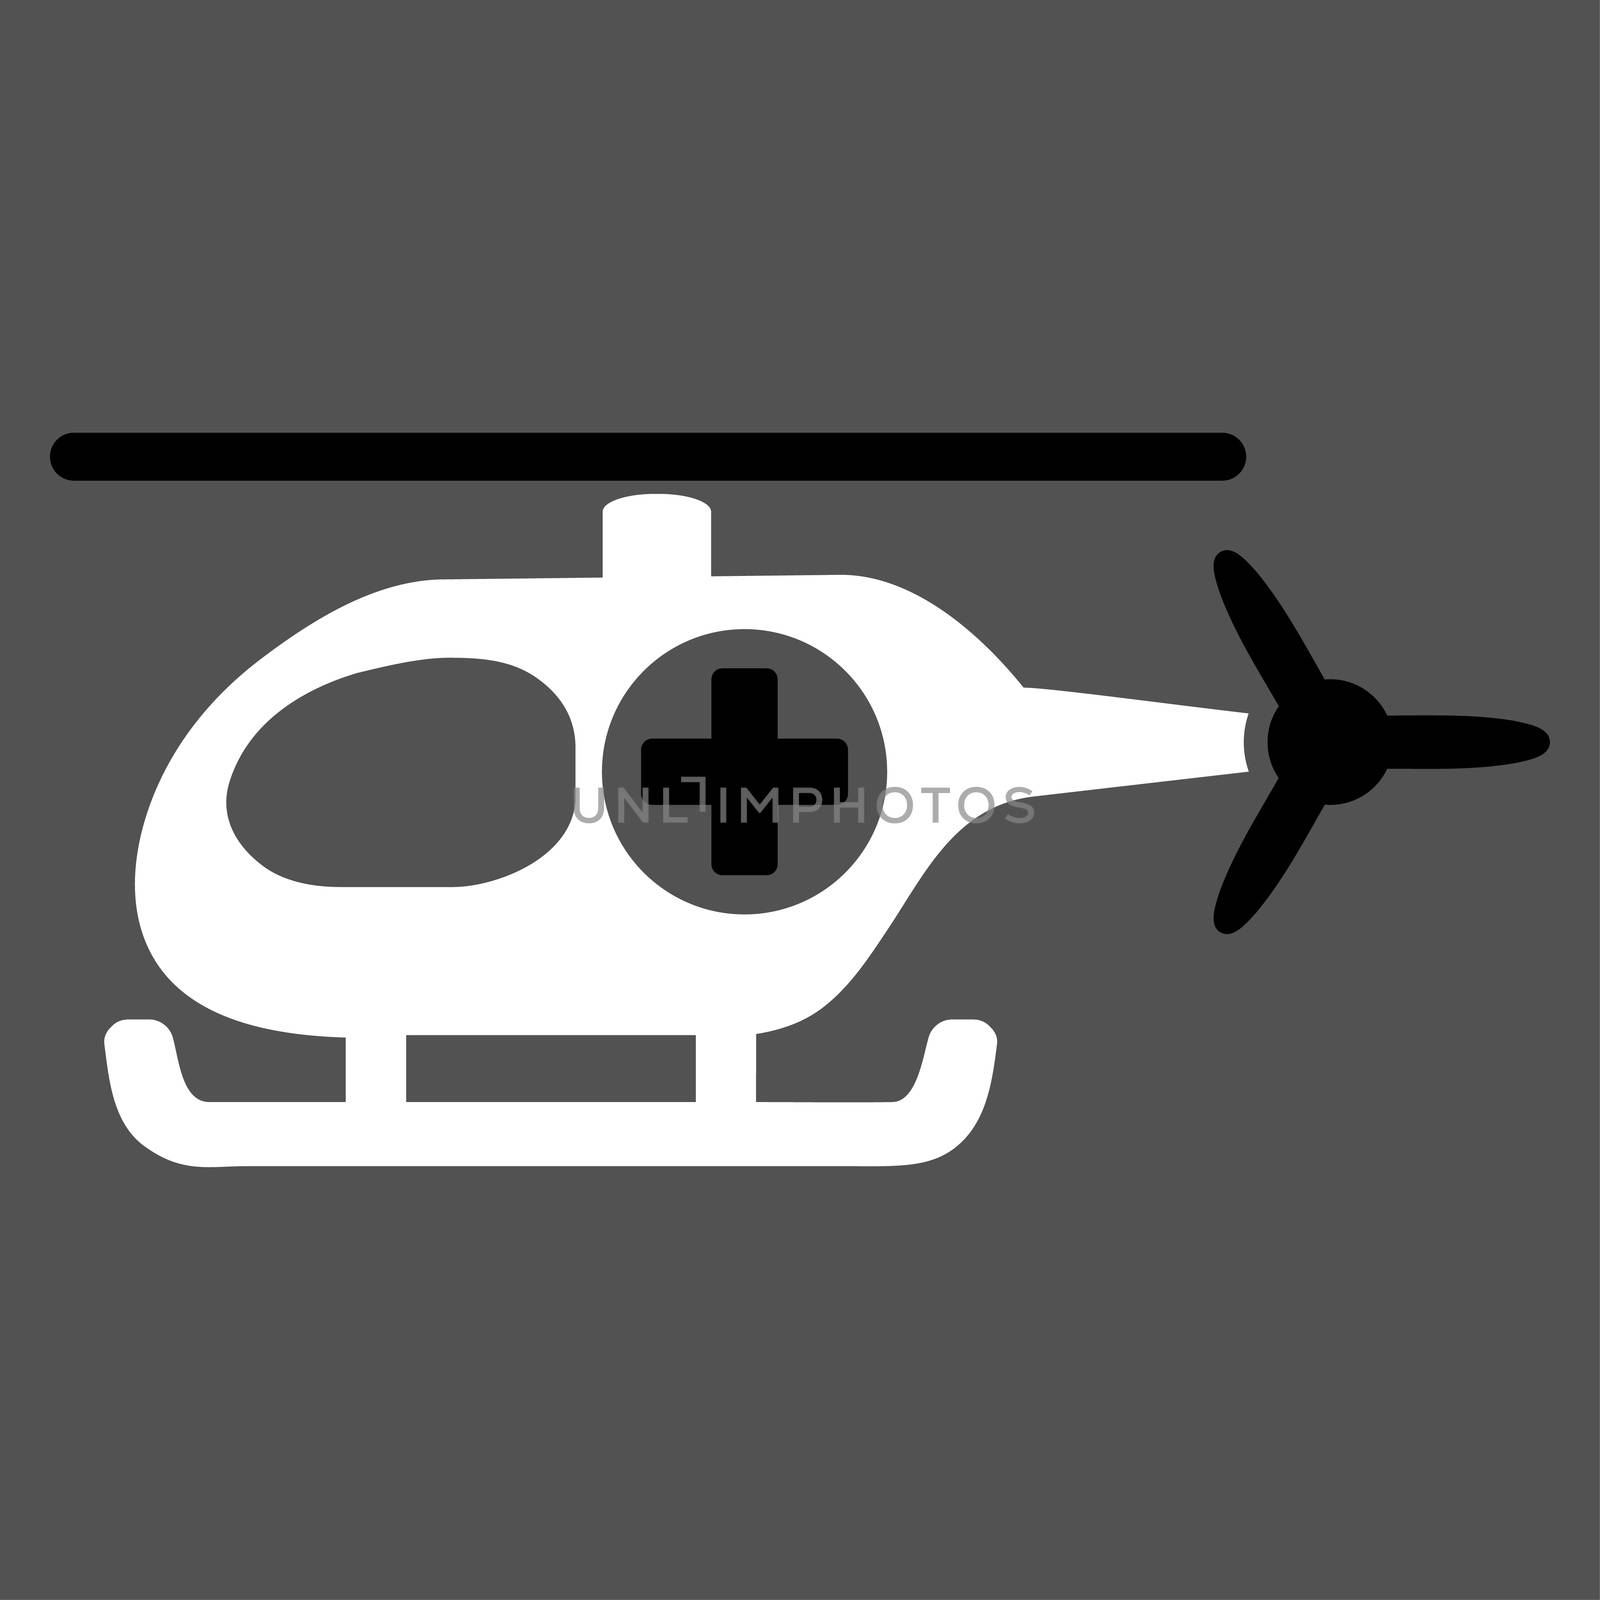 Medical Helicopter raster icon. Style is bicolor flat symbol, black and white colors, rounded angles, gray background.